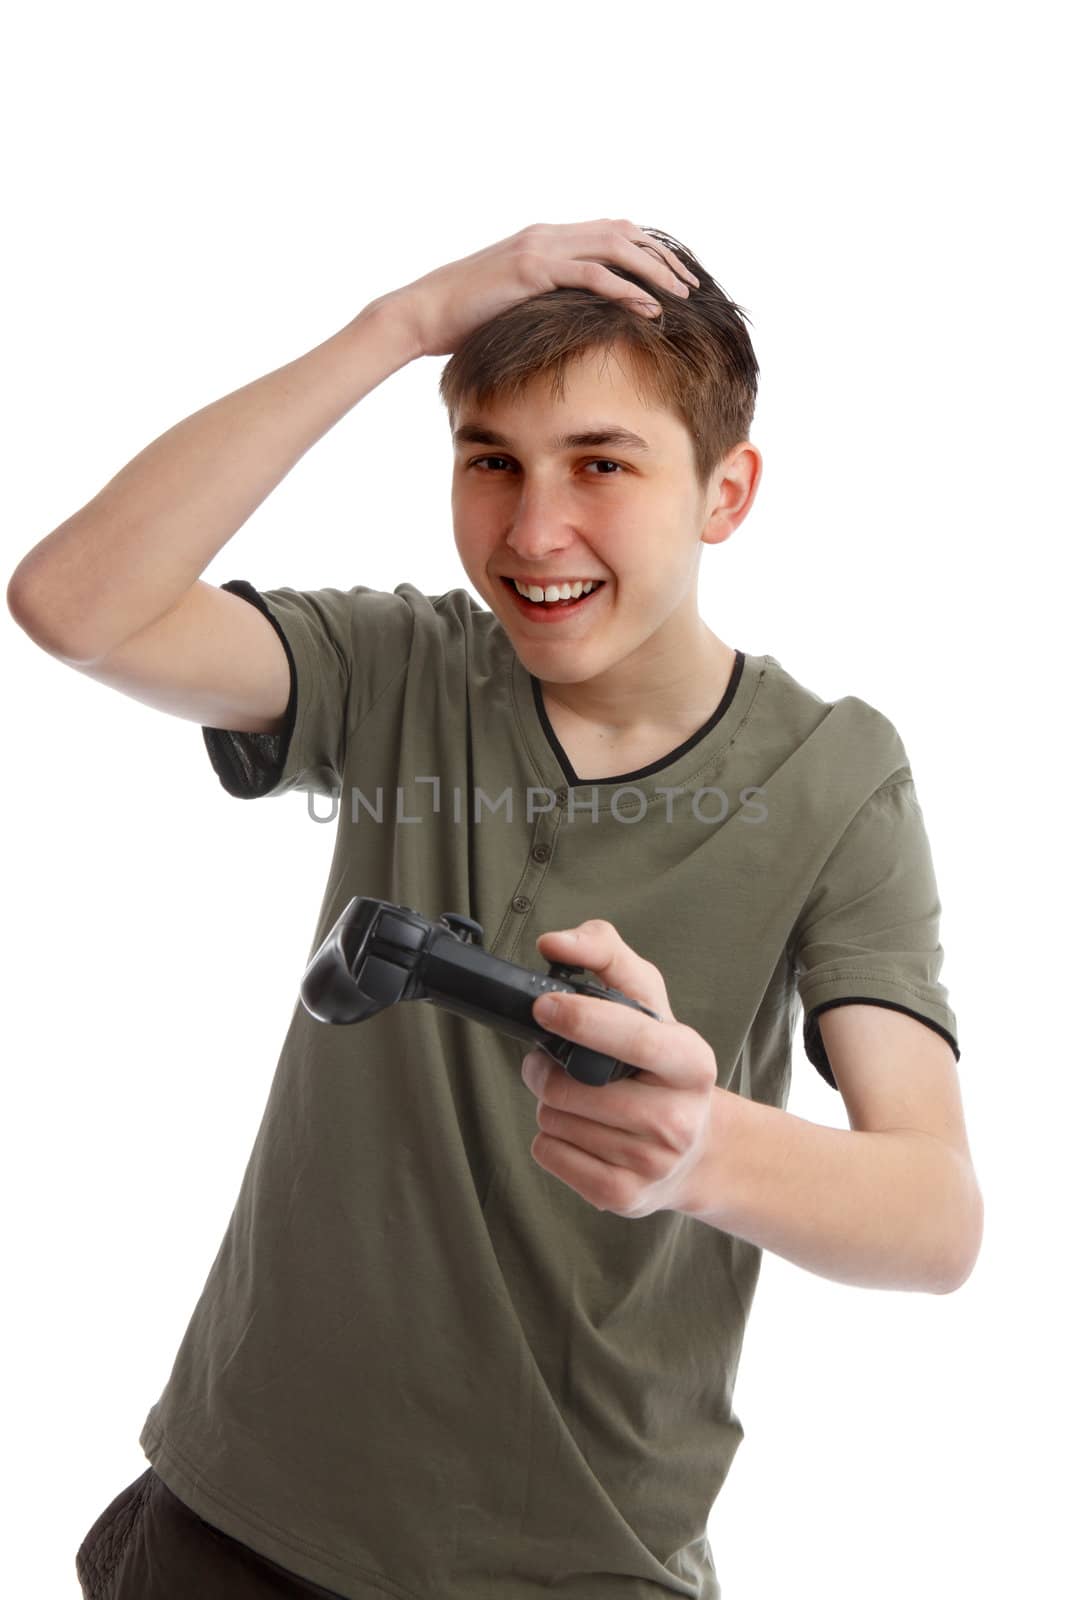 Happy boy at leisure, holding a wireless game controller.  White background.